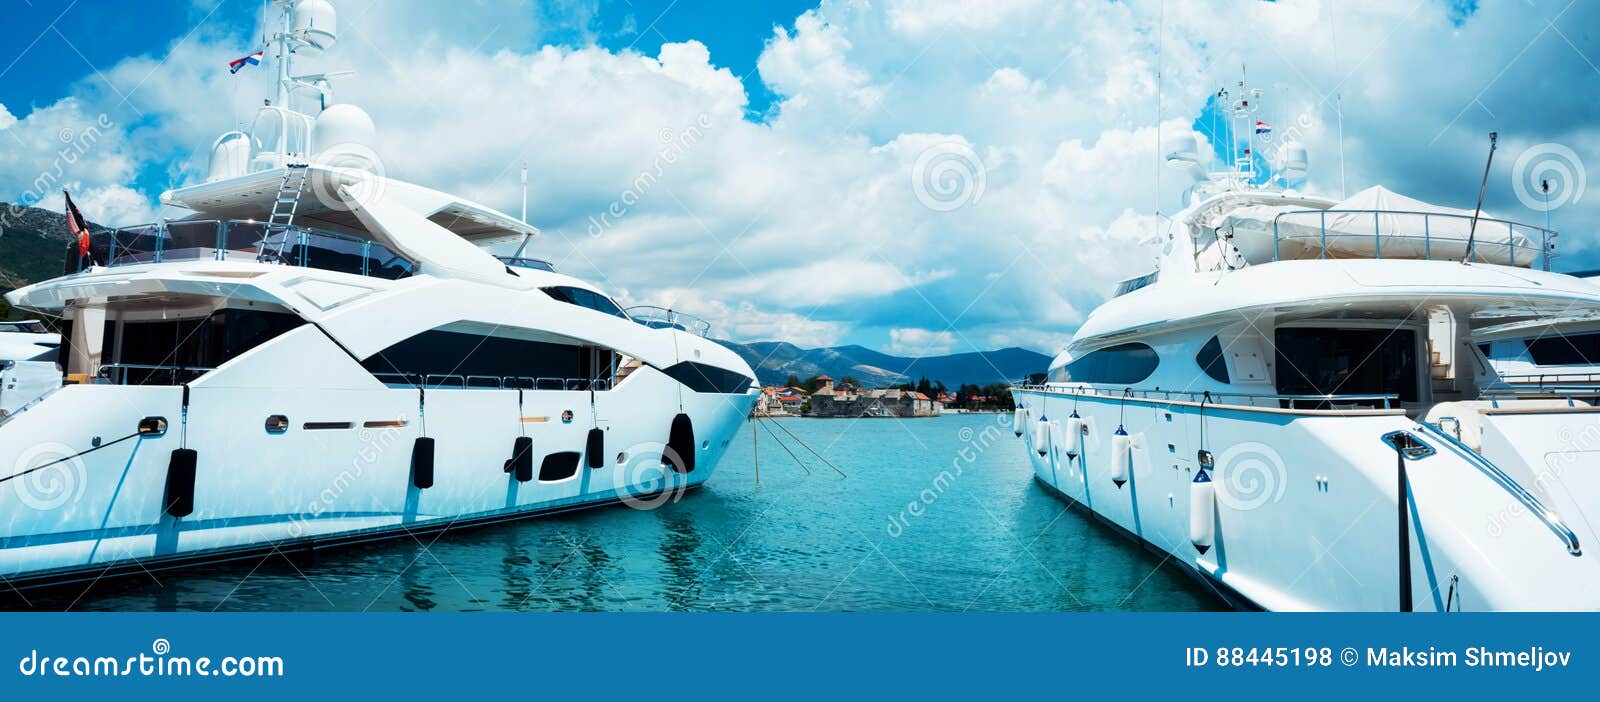 a woundeful yacht is in a blue sea. traveling, yachting, sailing concept.